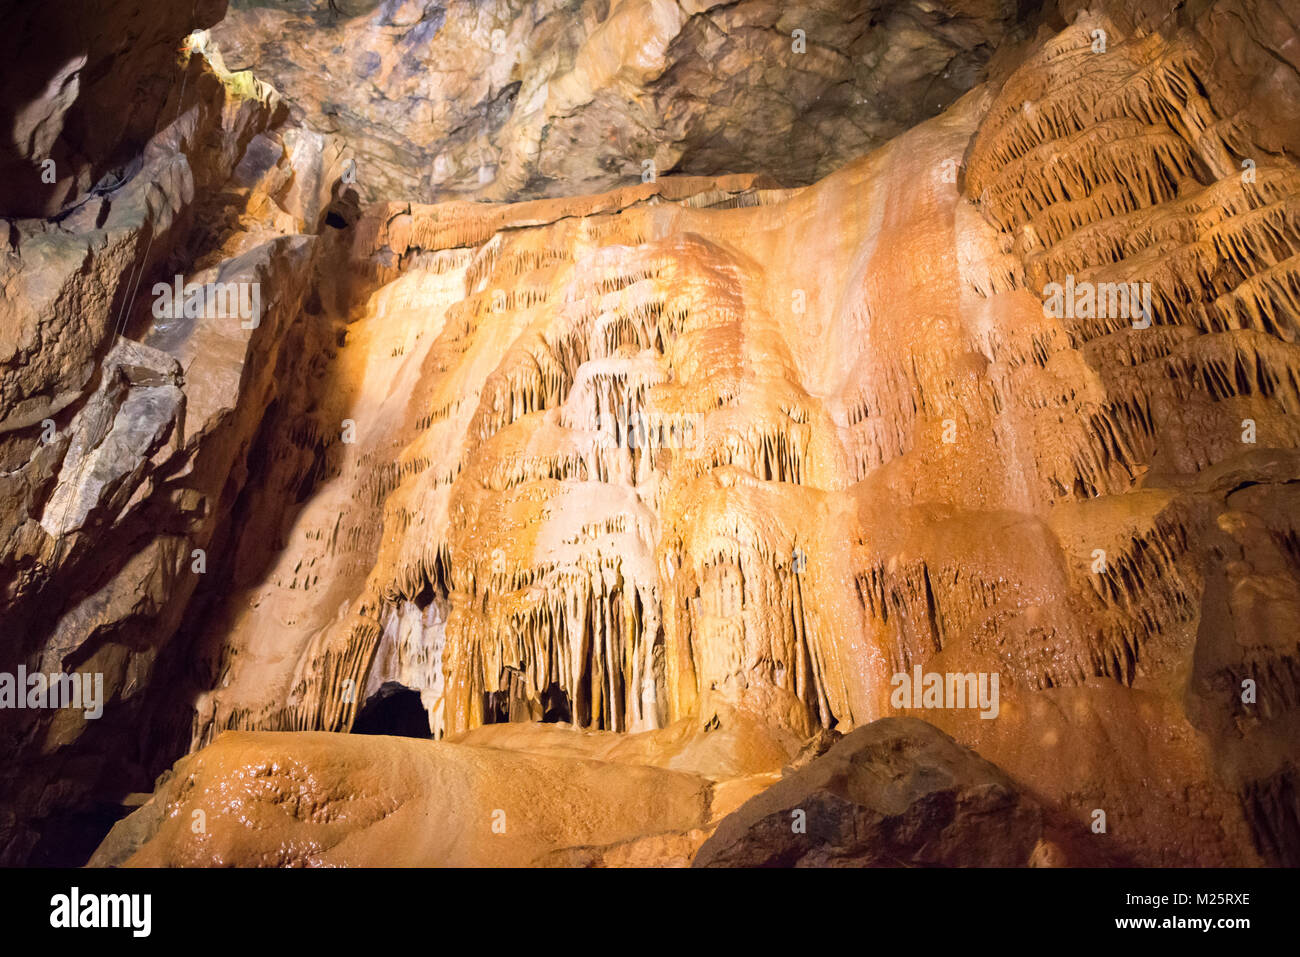 Limestone rock formation featuring a cascade of stalactites In Gough's Cave, Cheddar Gorge, Mendip Hills, Somerset, UK Stock Photo